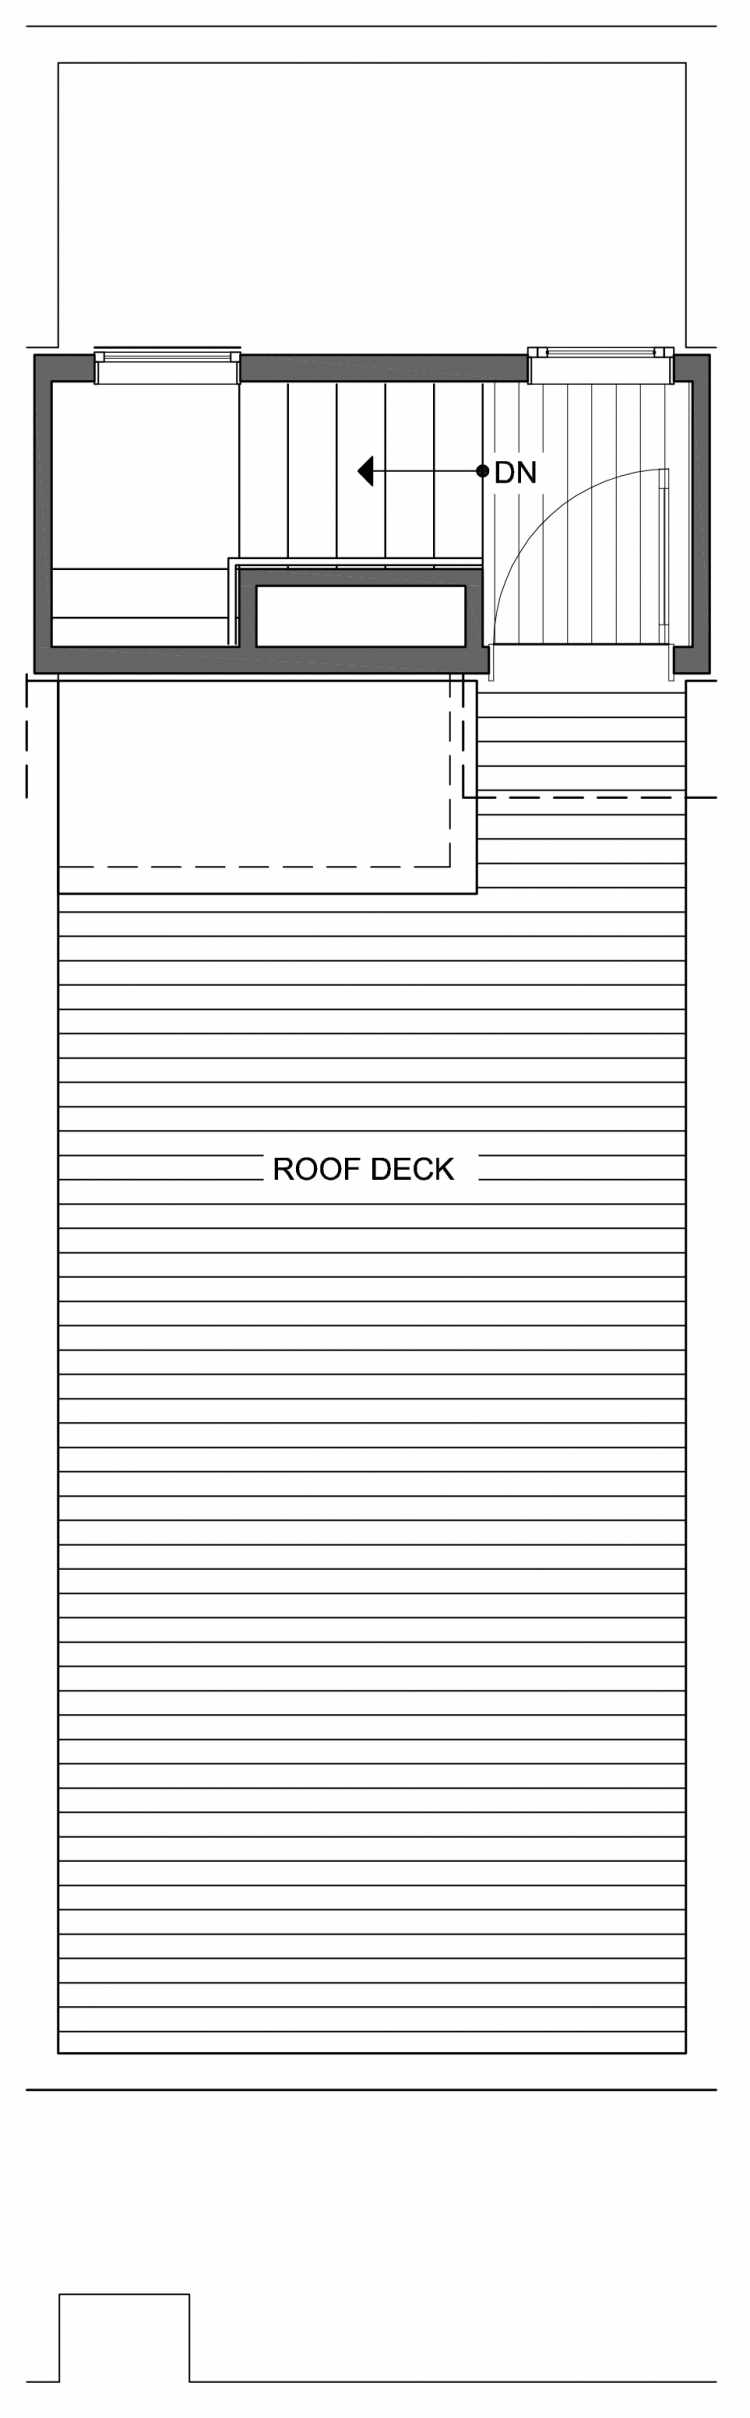 Roof Deck Floor Plan of 806A N 46th St, One of the Nino 15 East Townhomes by Isola Homes